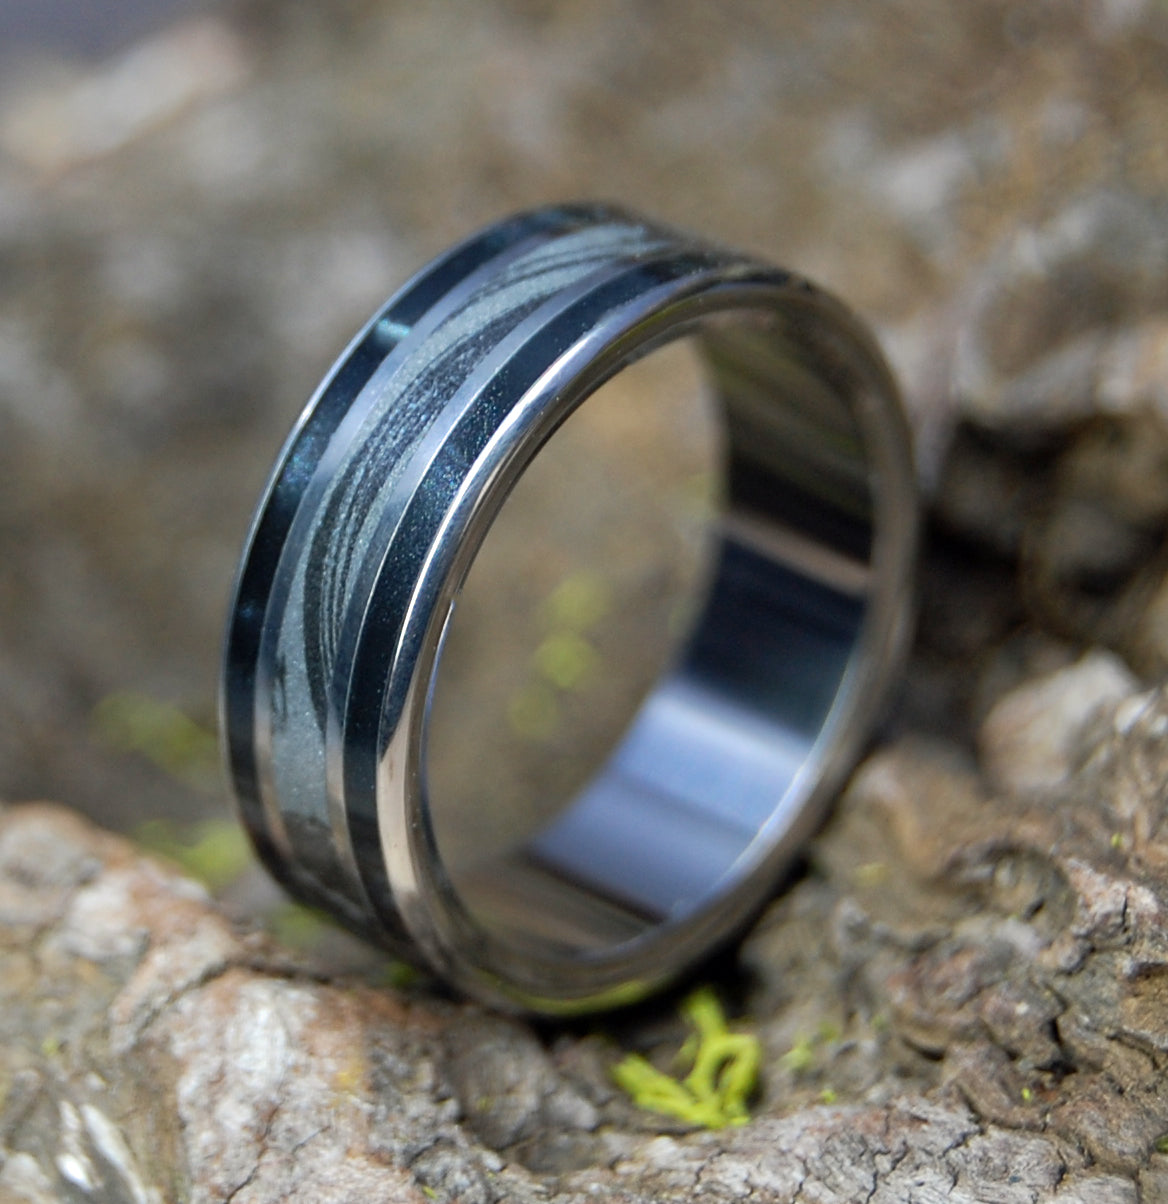 OUR MOON | Black & Silver Mokume Gane and Black Marbled Opalescent - Titanium Wedding Ring - Minter and Richter Designs